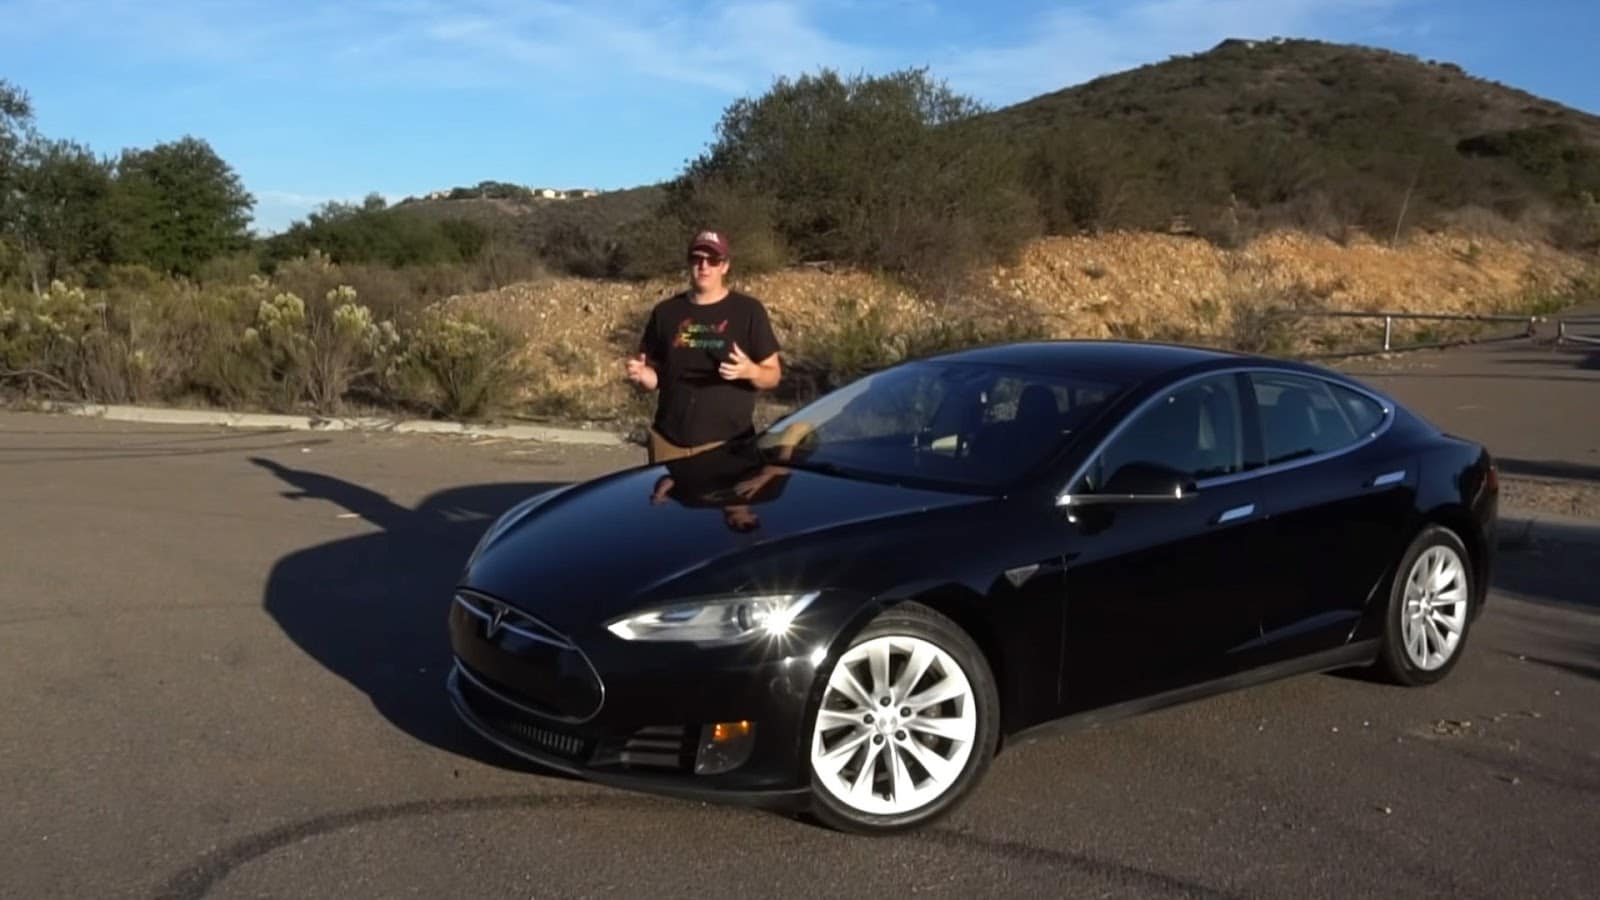 How to Find Mileage on a Tesla Model